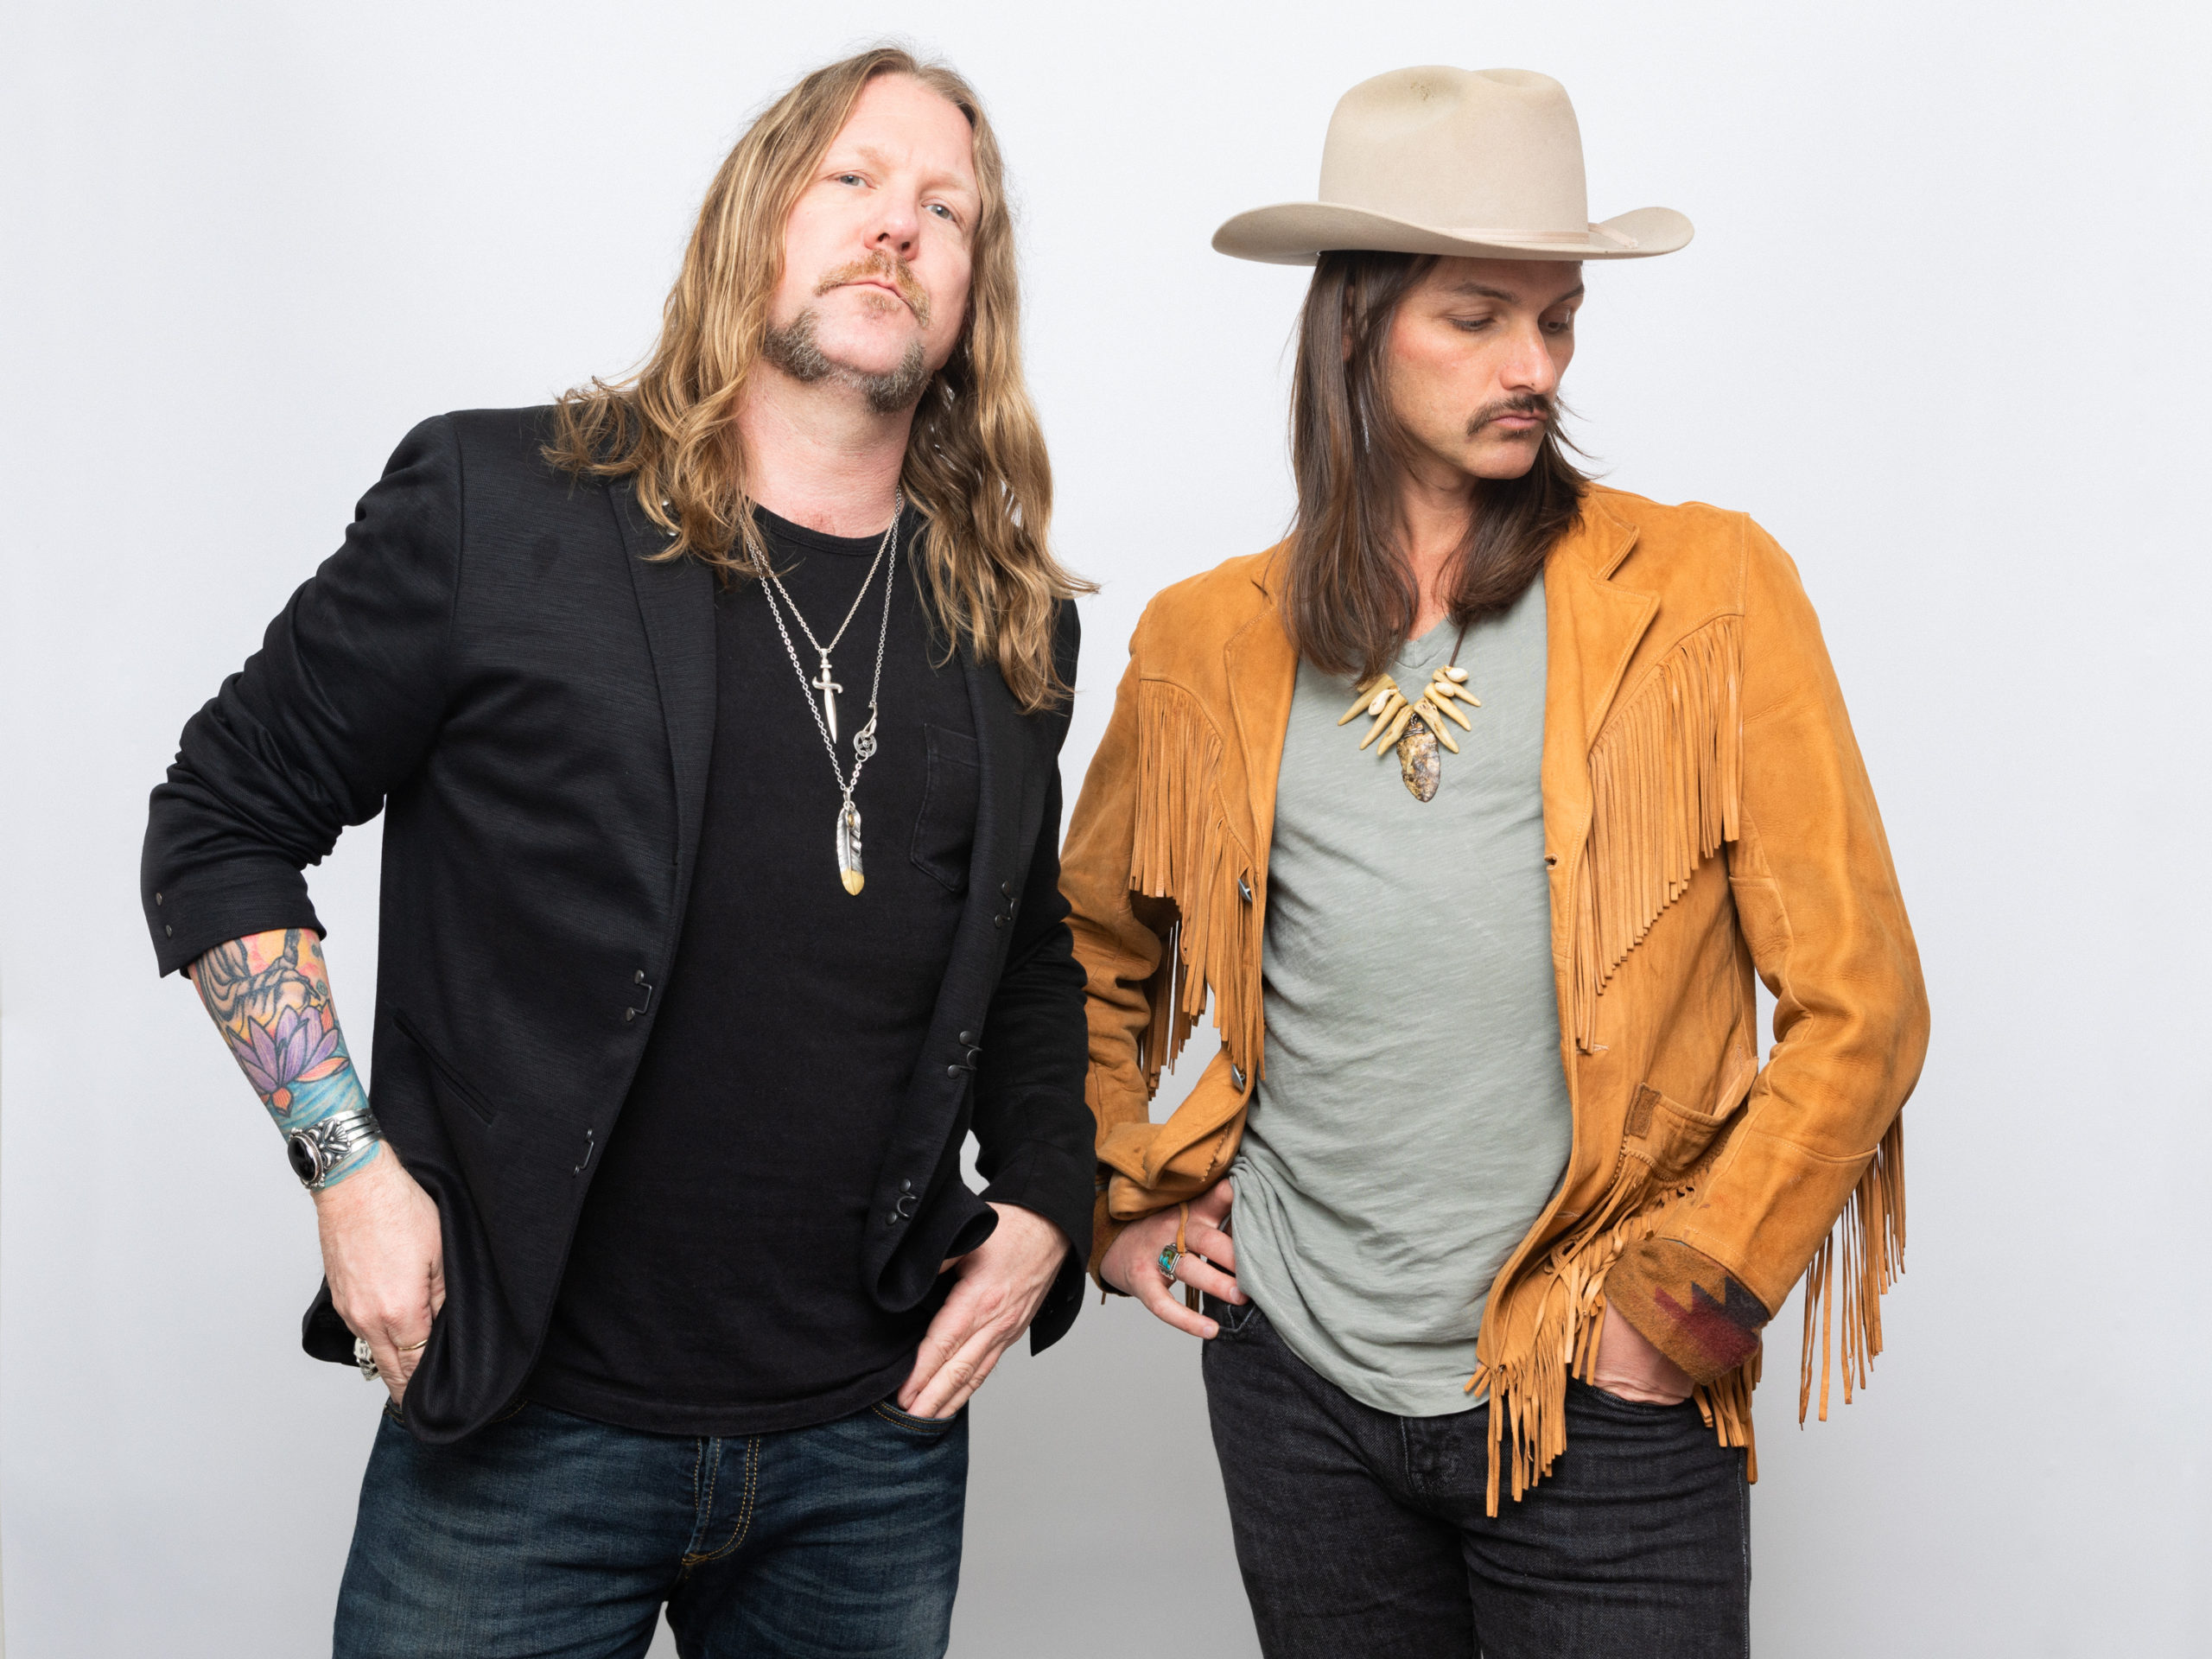 DEVON ALLMAN TALKS ABOUT HIS MUSIC AND LIFE Weekly